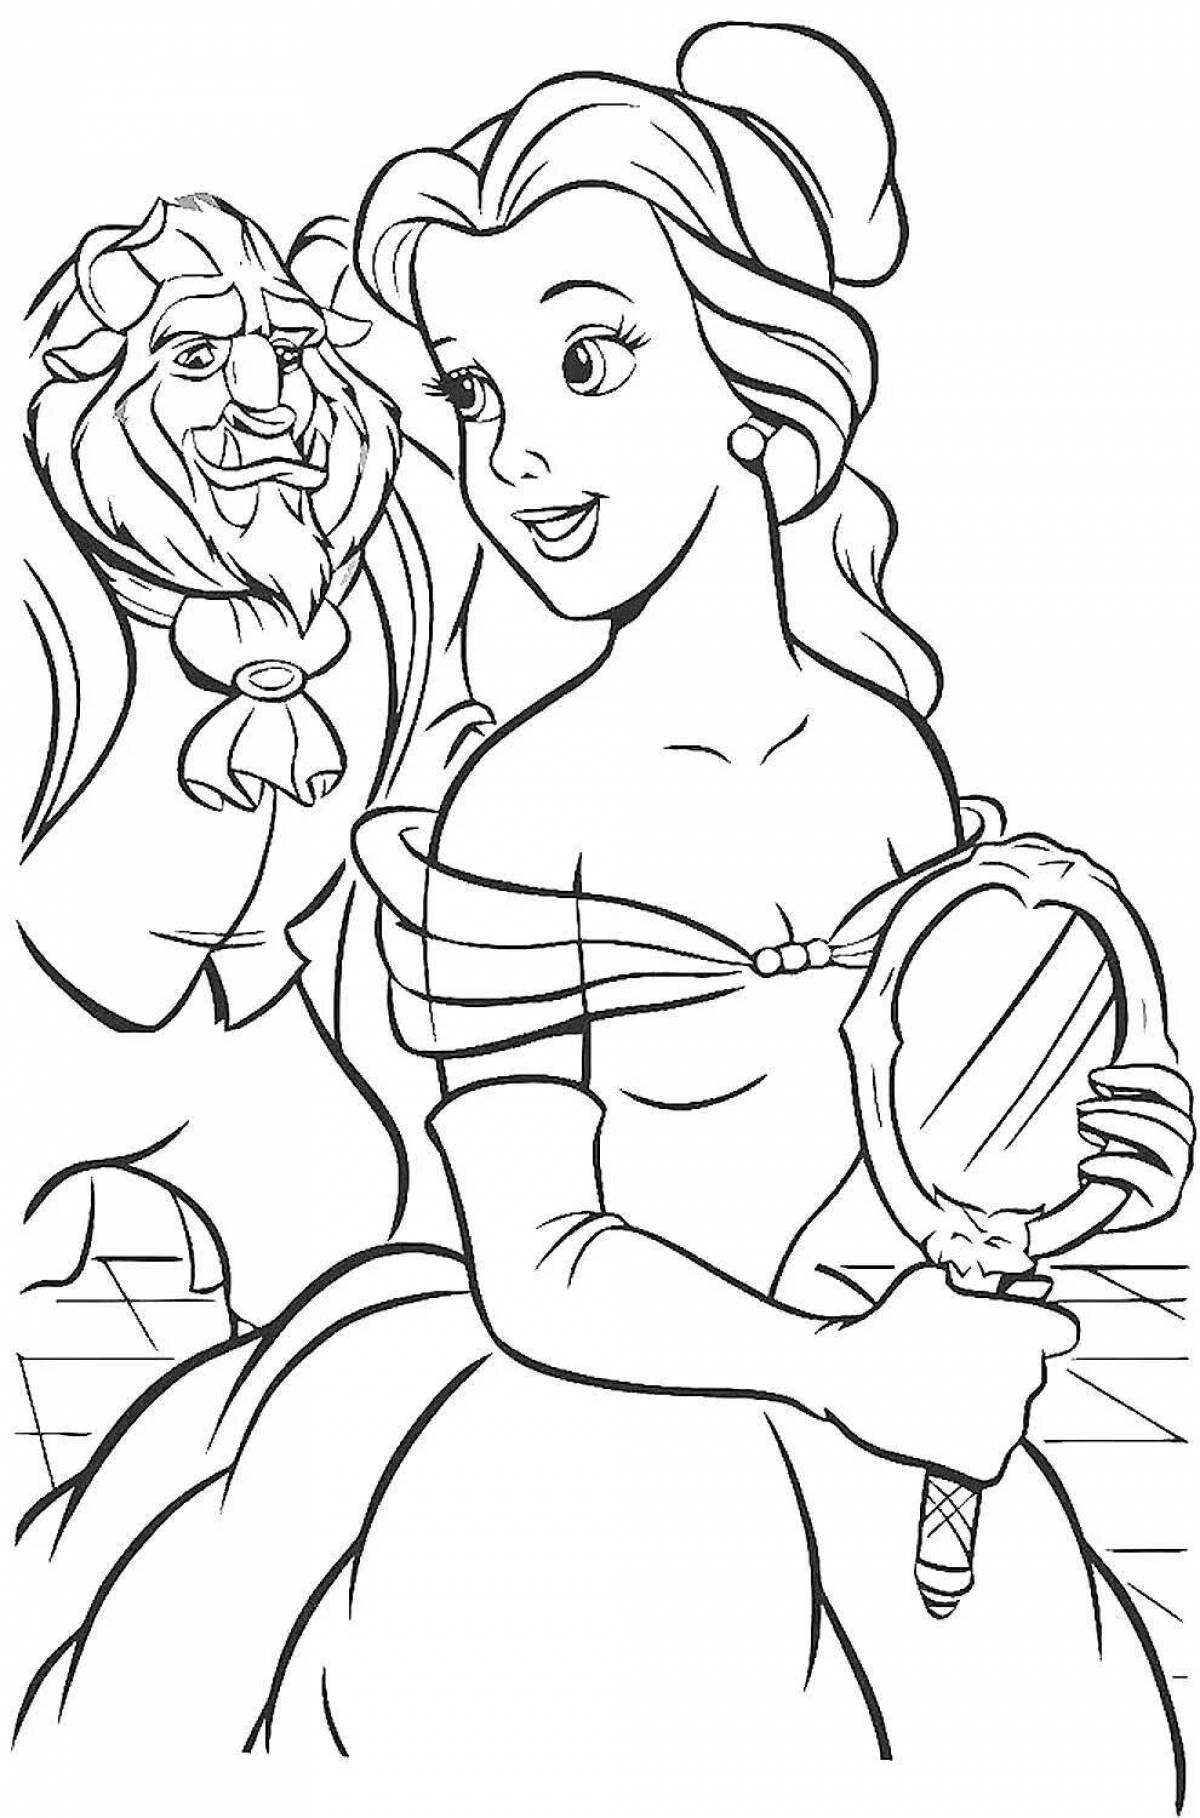 Belle and monster colorfully illustrated coloring page